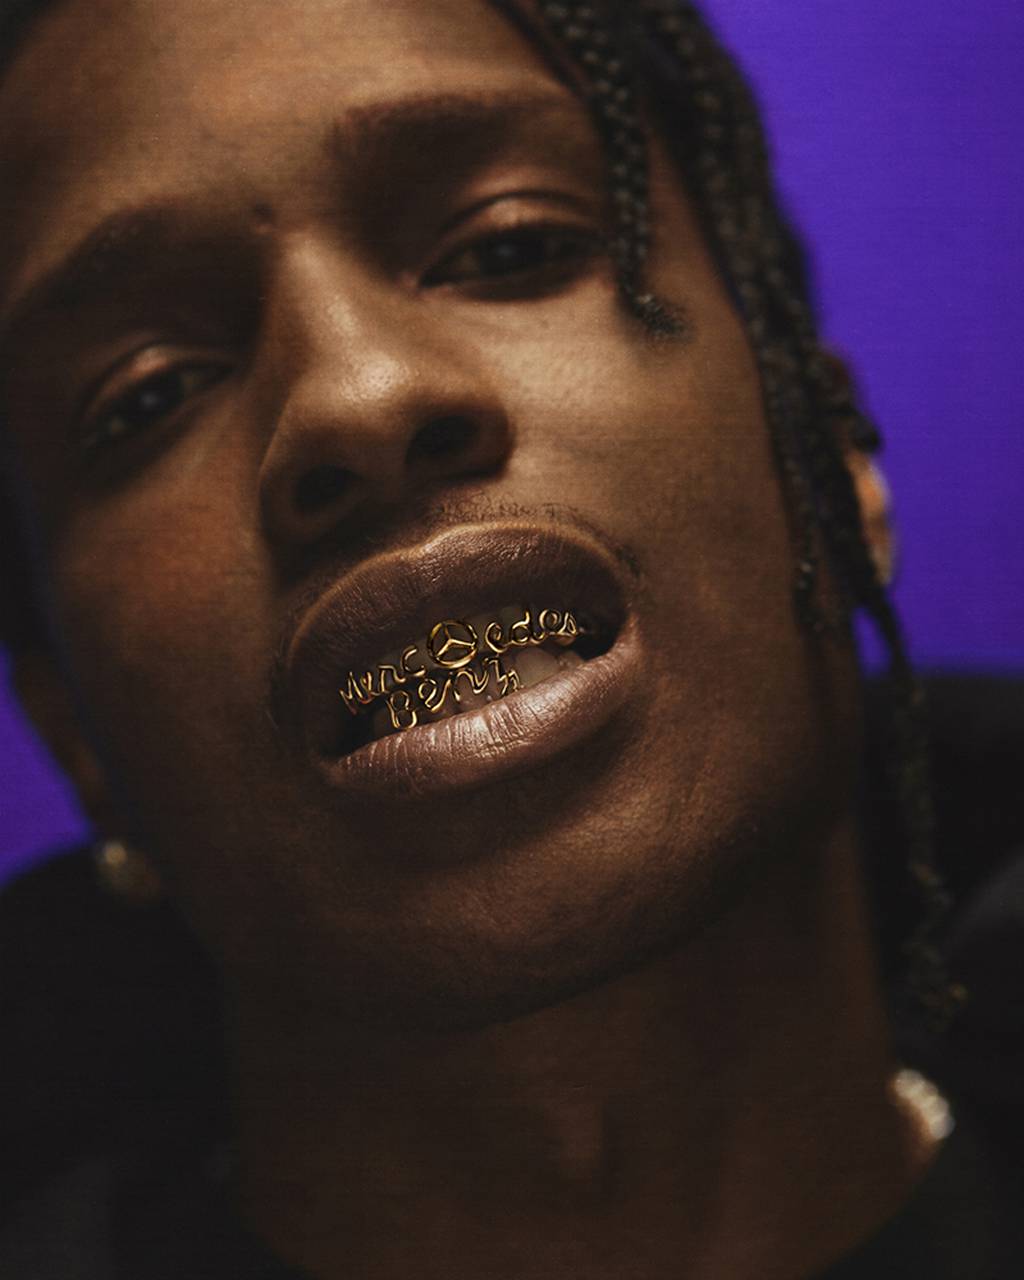 Dolly Cohen won last year's Andam accessories prize for custom mouth jewellery including this grill for the Mercedes-Benz x A$AP Rocky collab.